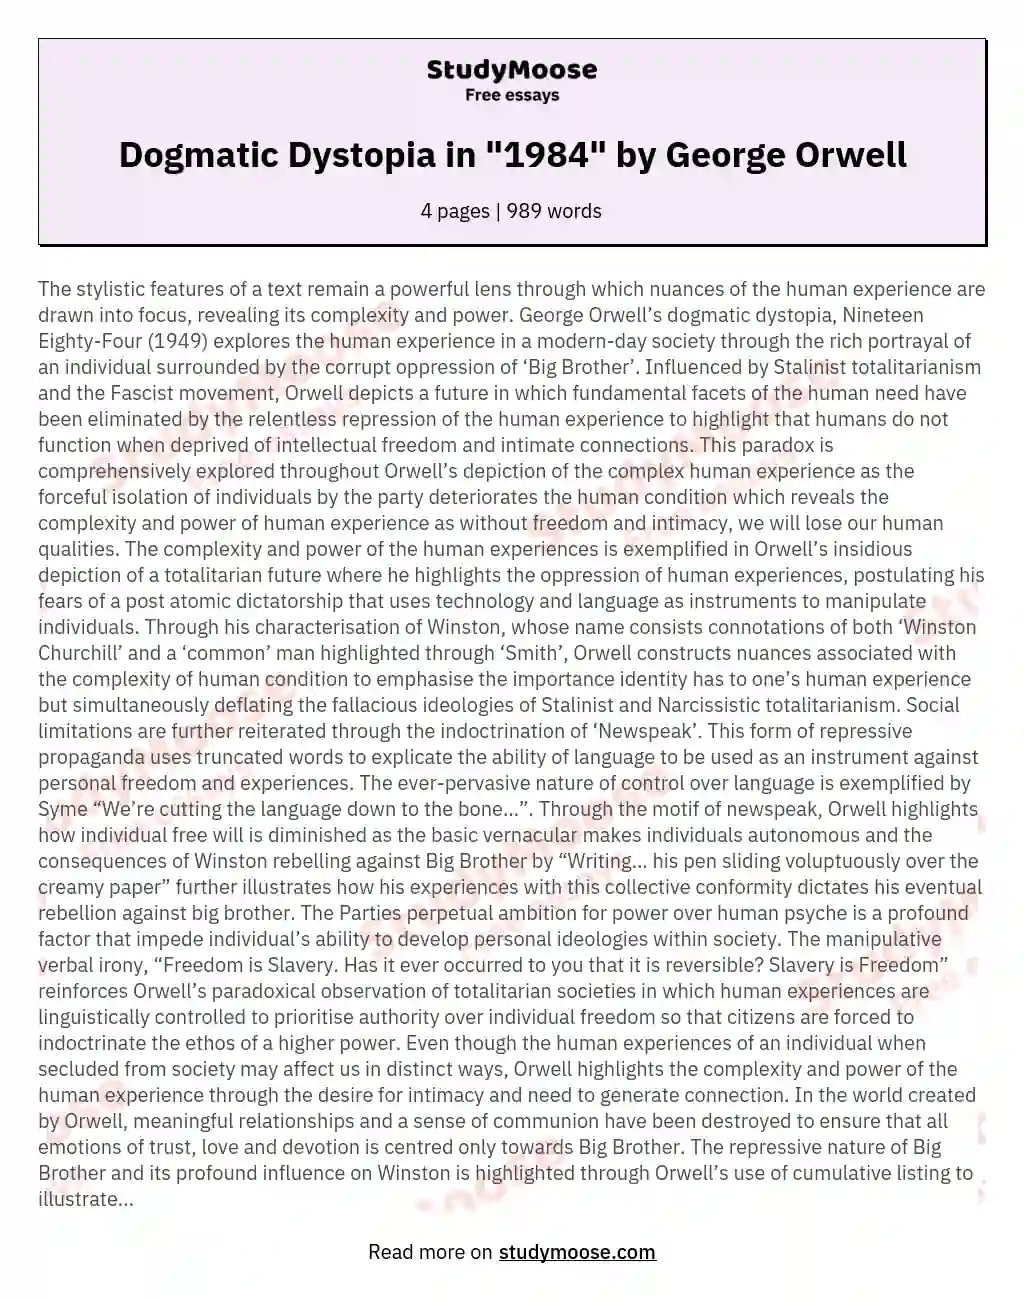 Dogmatic Dystopia in "1984" by George Orwell essay